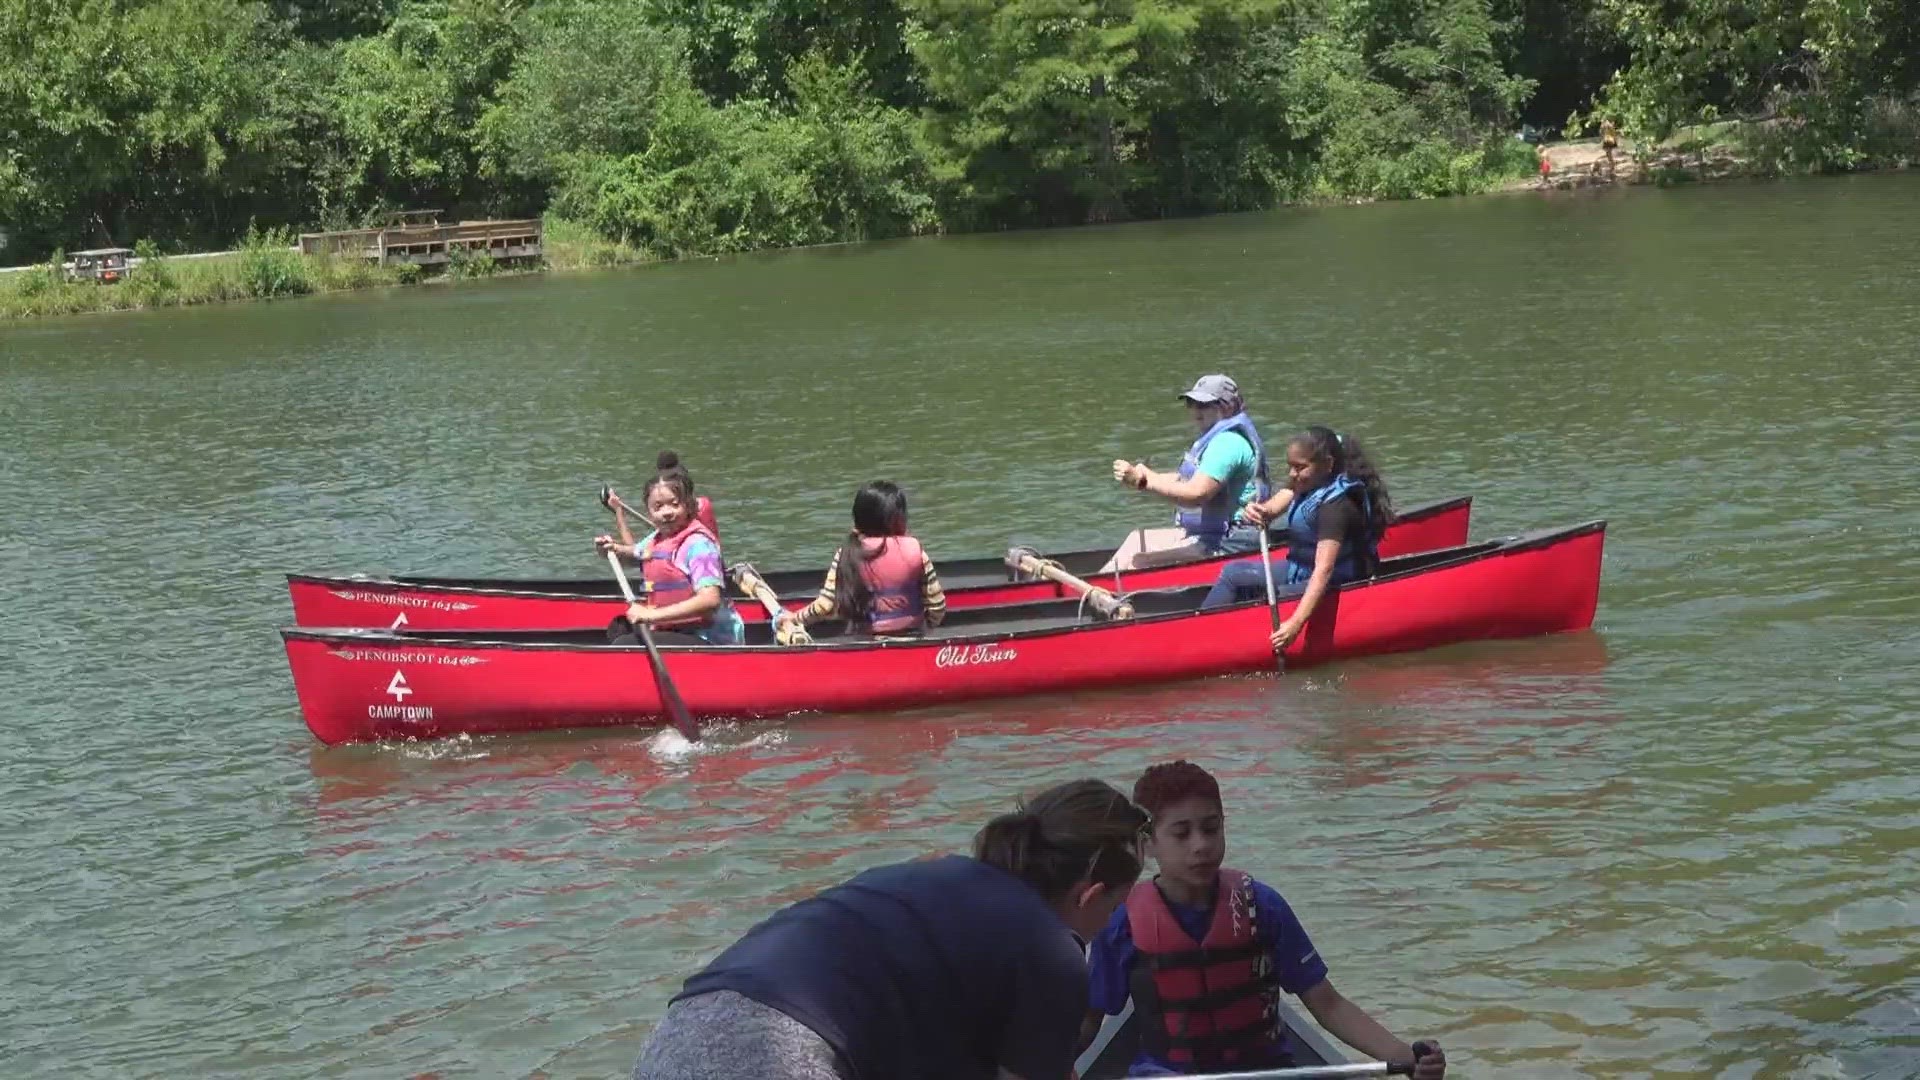 Camptown is a youth development camp in Indianapolis that challenges, mentors and teaches kids about life through nature programs and outdoor adventures.